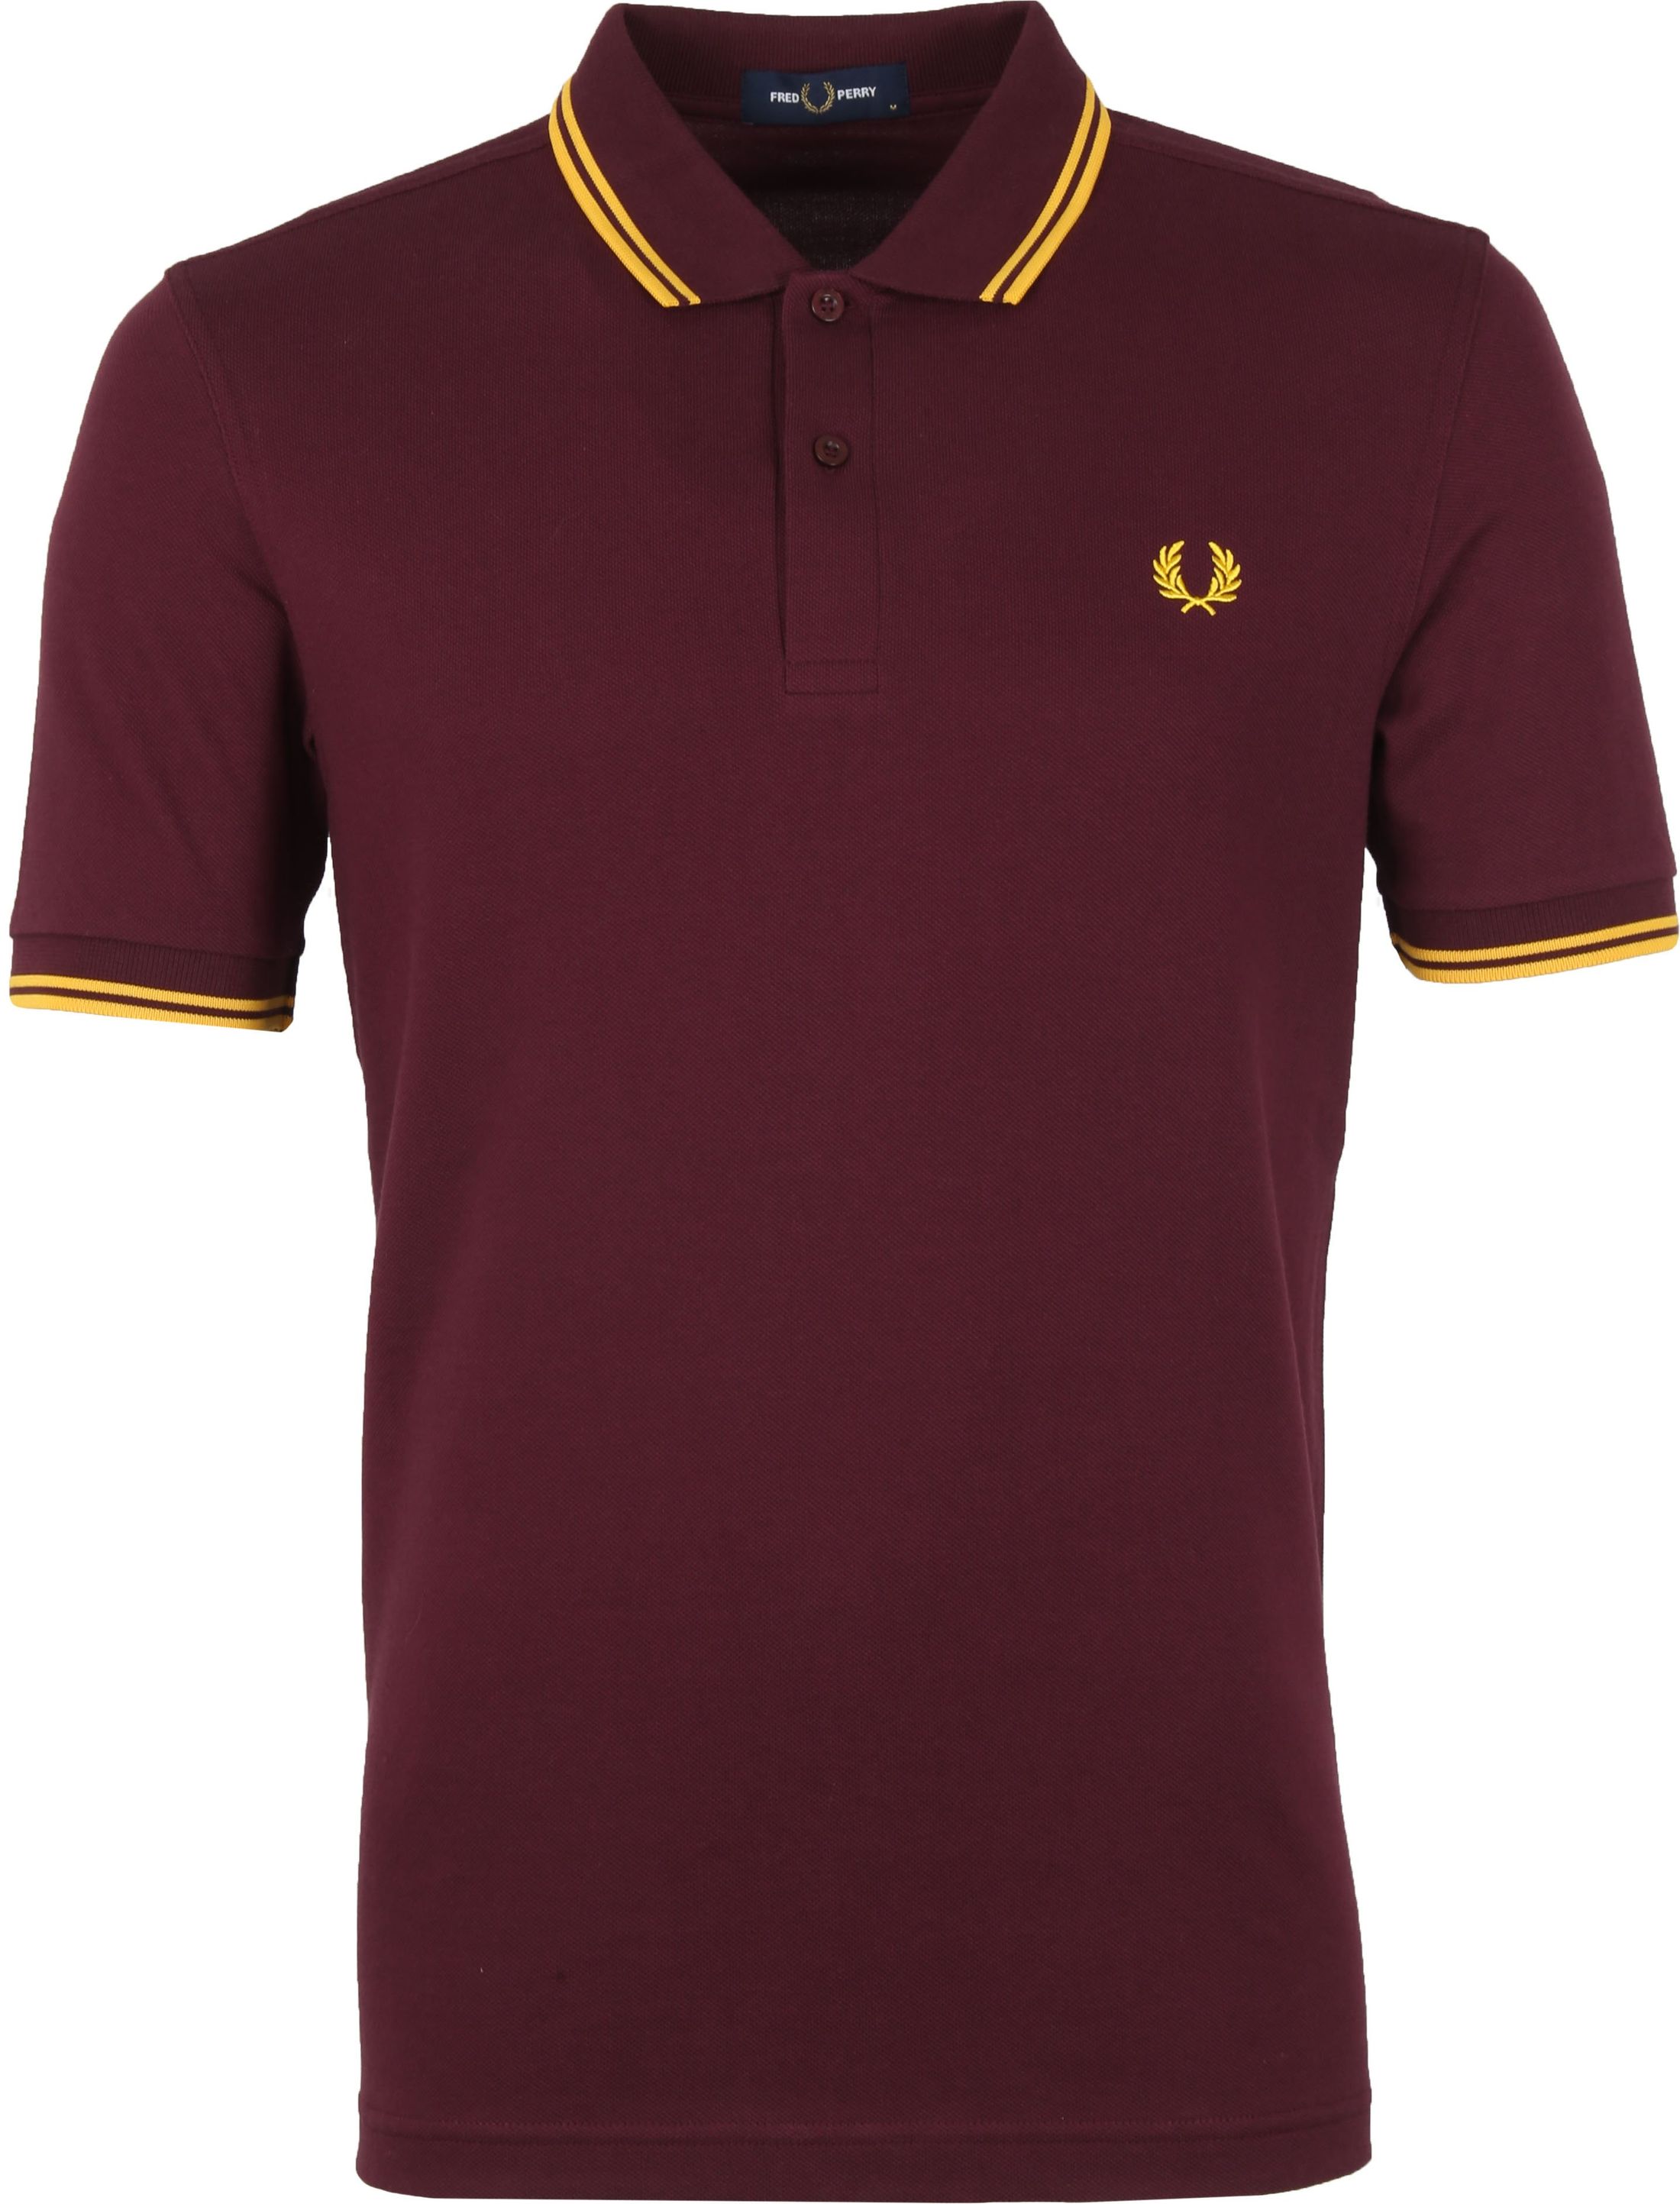 Fred Perry Polo M3600-P73 bordeaux Burgundy size L